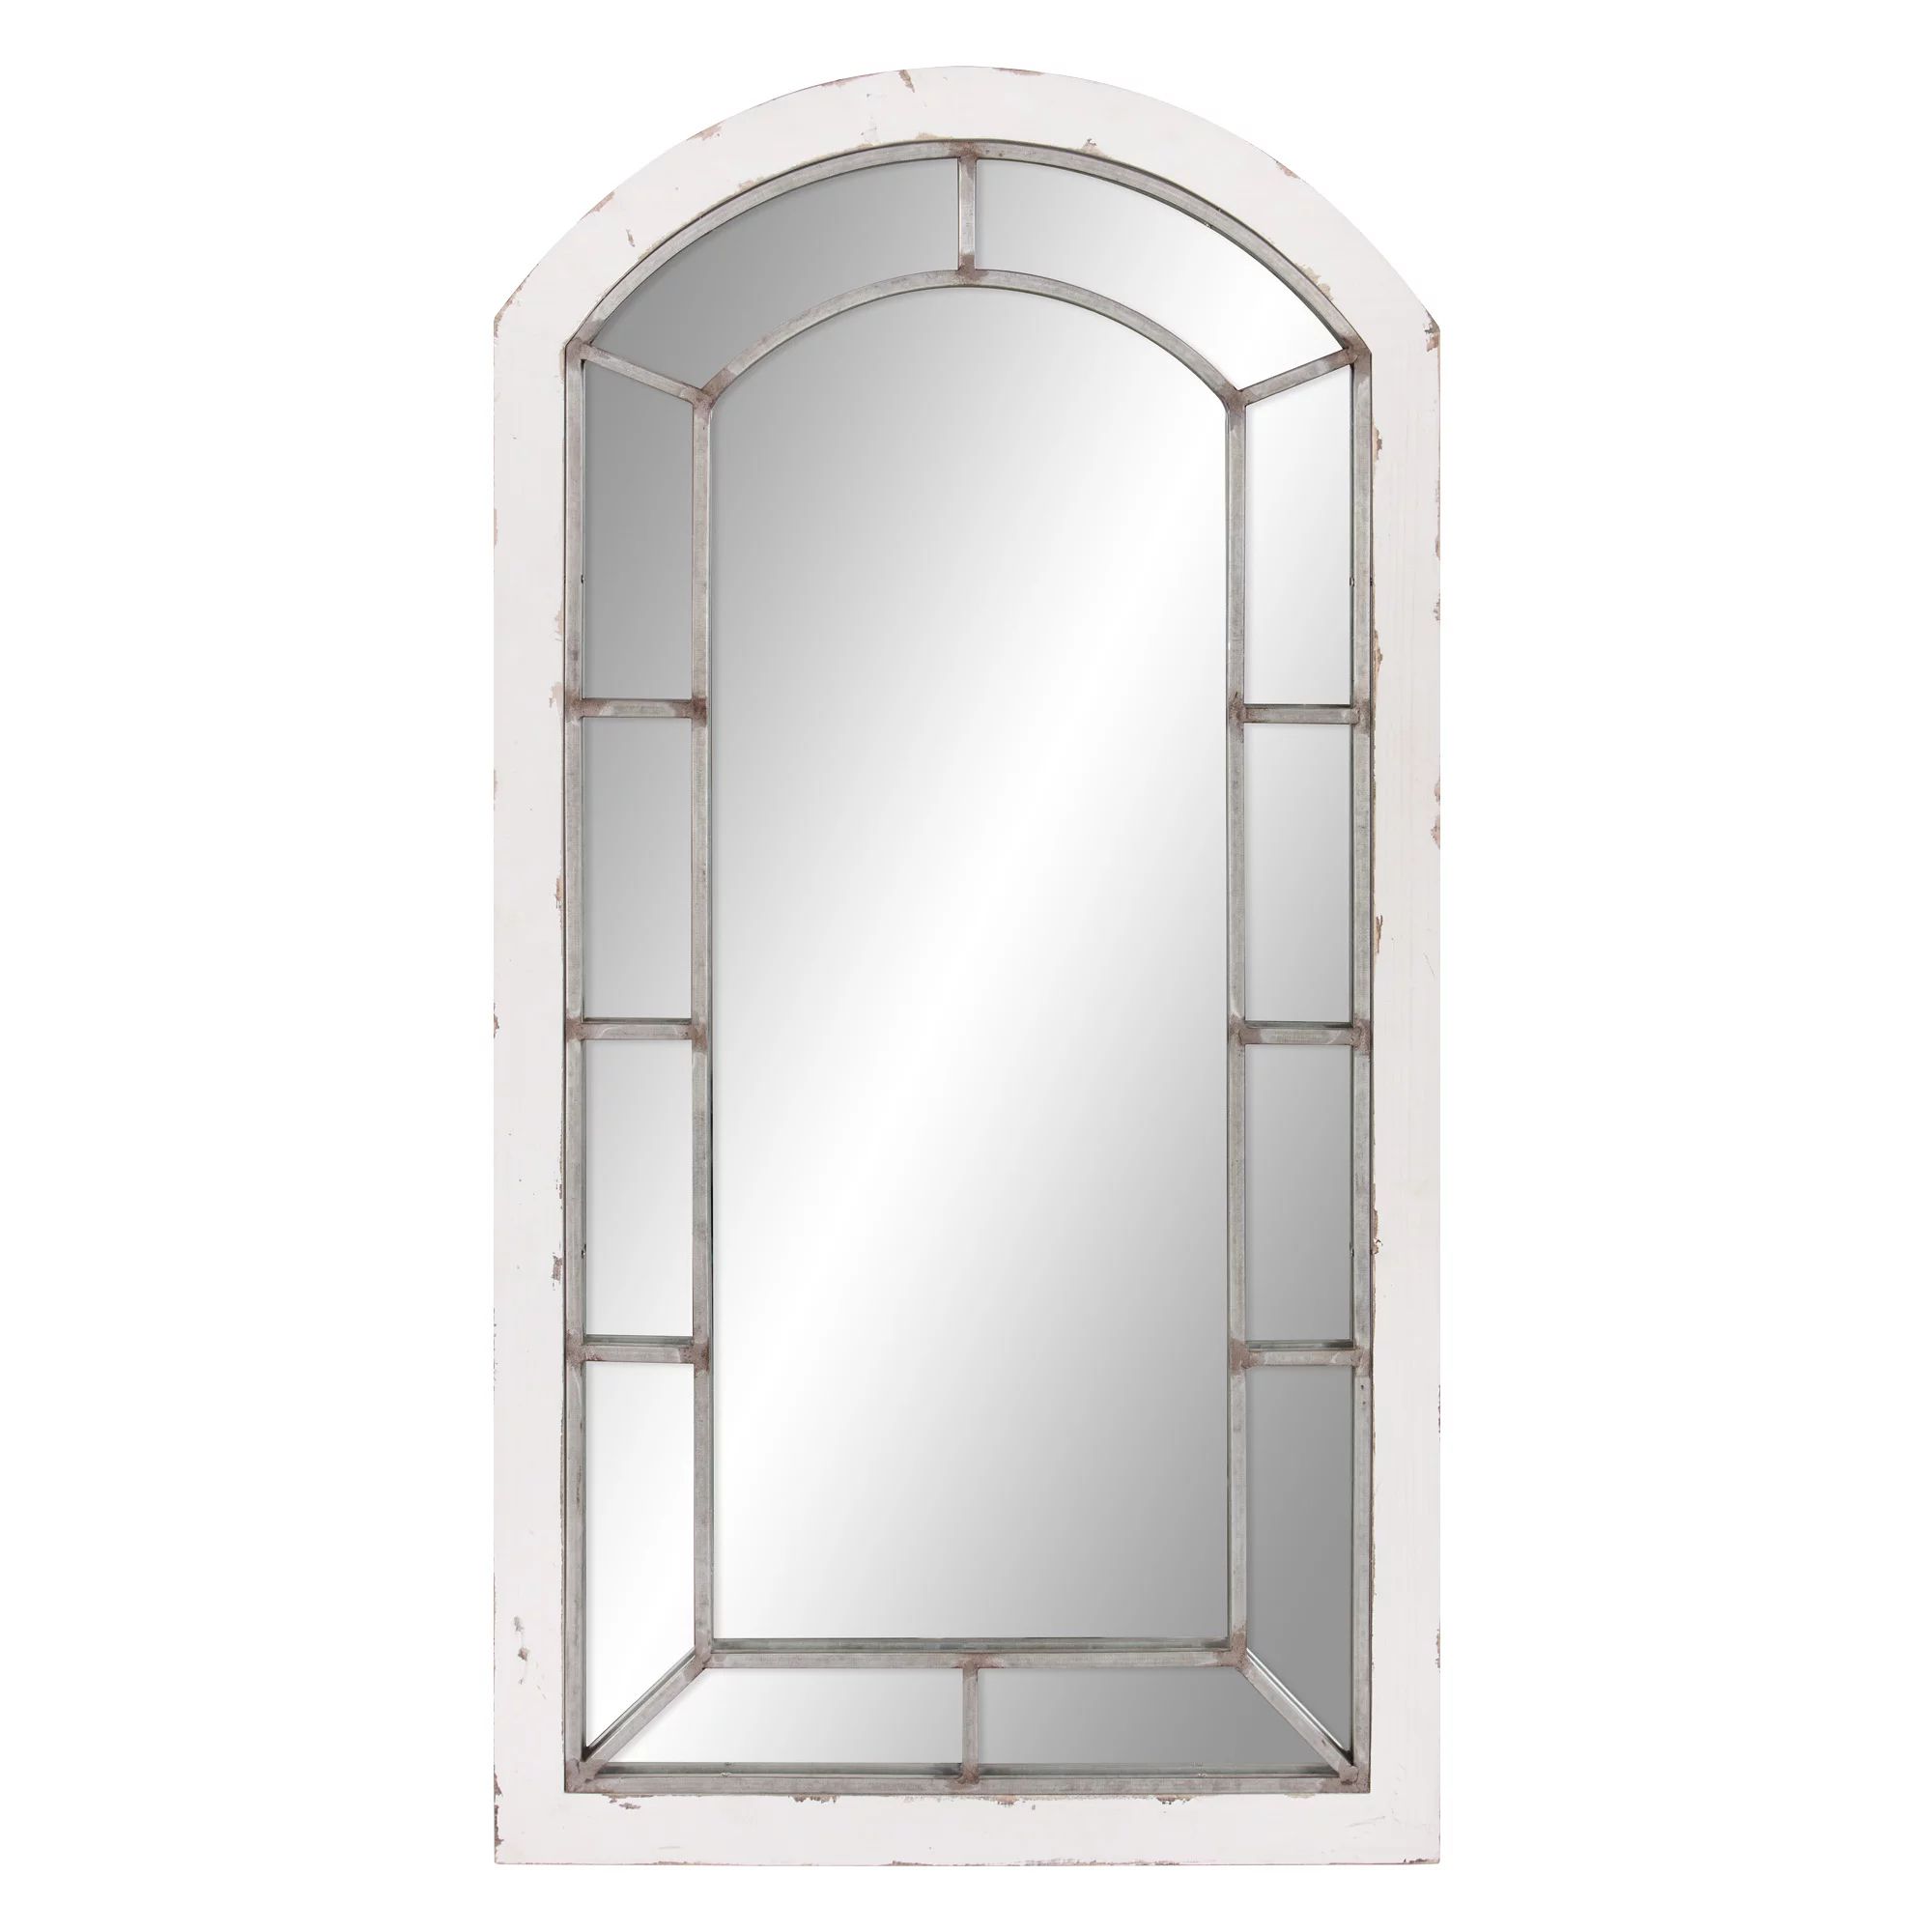 Distressed White And Antique Silver Arch Windowpane Wall Mirror 24"x44 Intended For Antiqued Silver Quatrefoil Wall Mirrors (View 14 of 15)